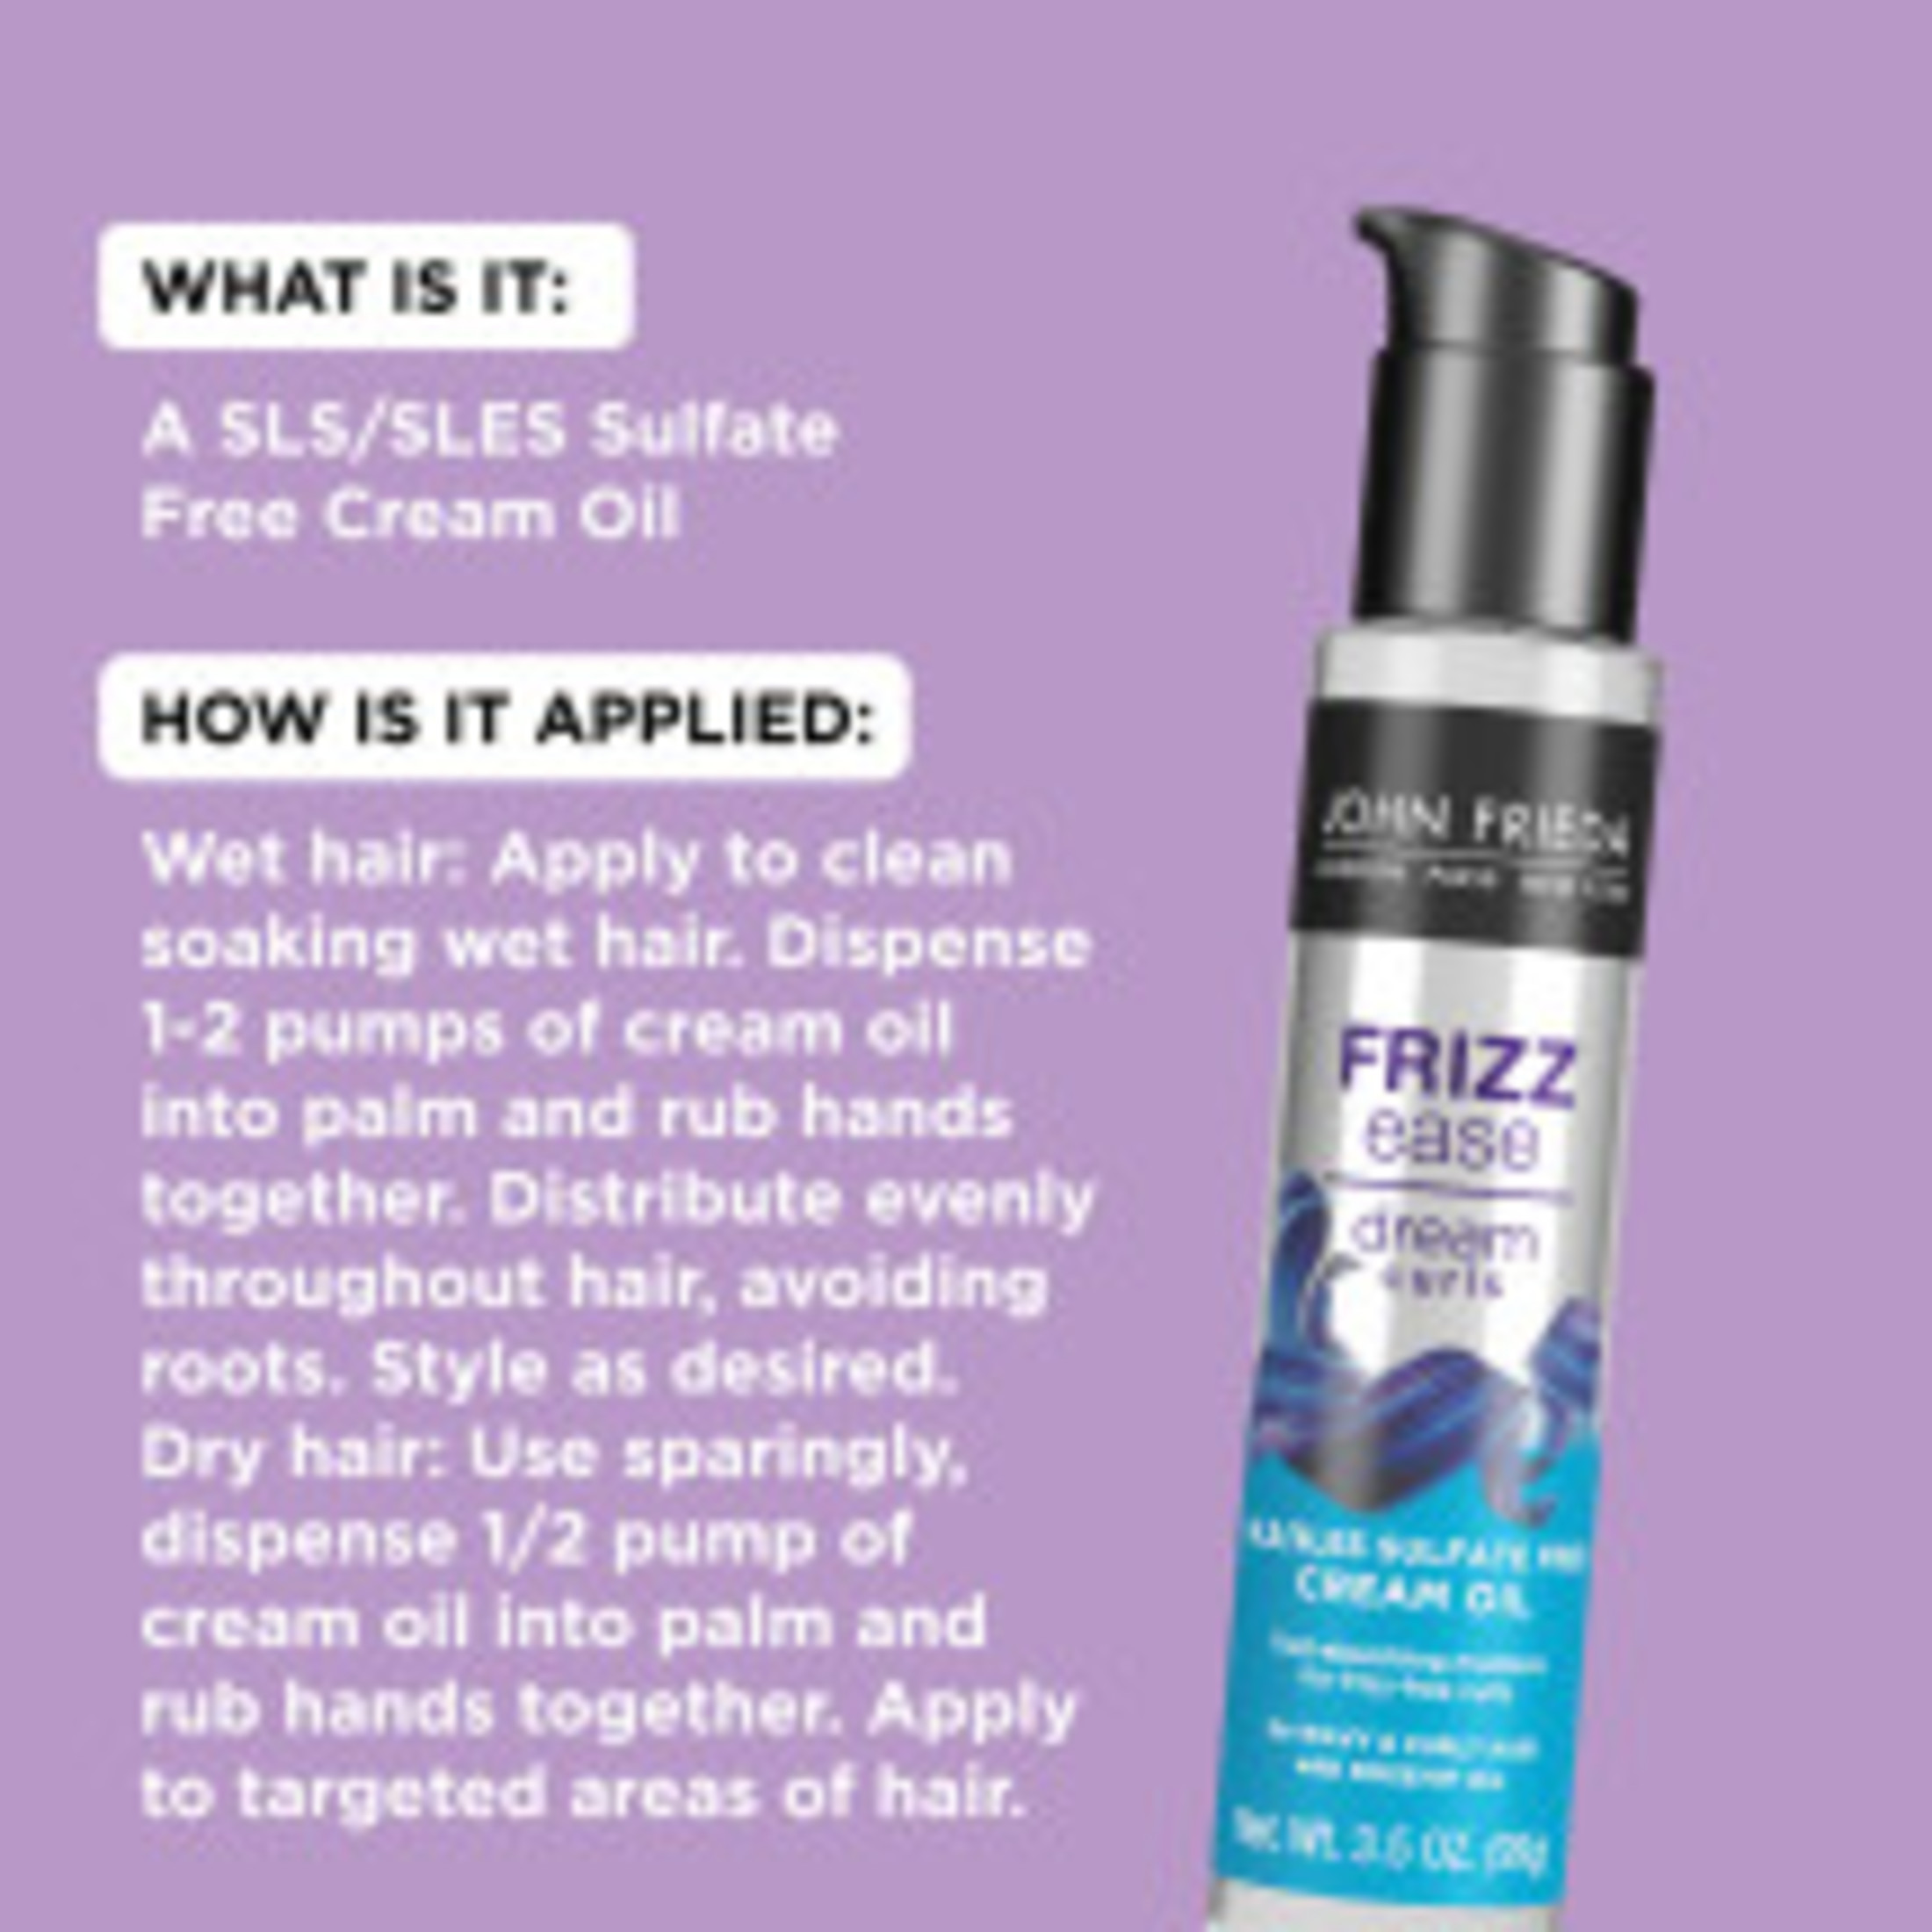 John Frieda Anti Frizz, Frizz Ease Dream Curls with Rosehip Oil, SLS/SLES Sulfate Free Cremé Oil, 3.5 fl oz - image 5 of 7